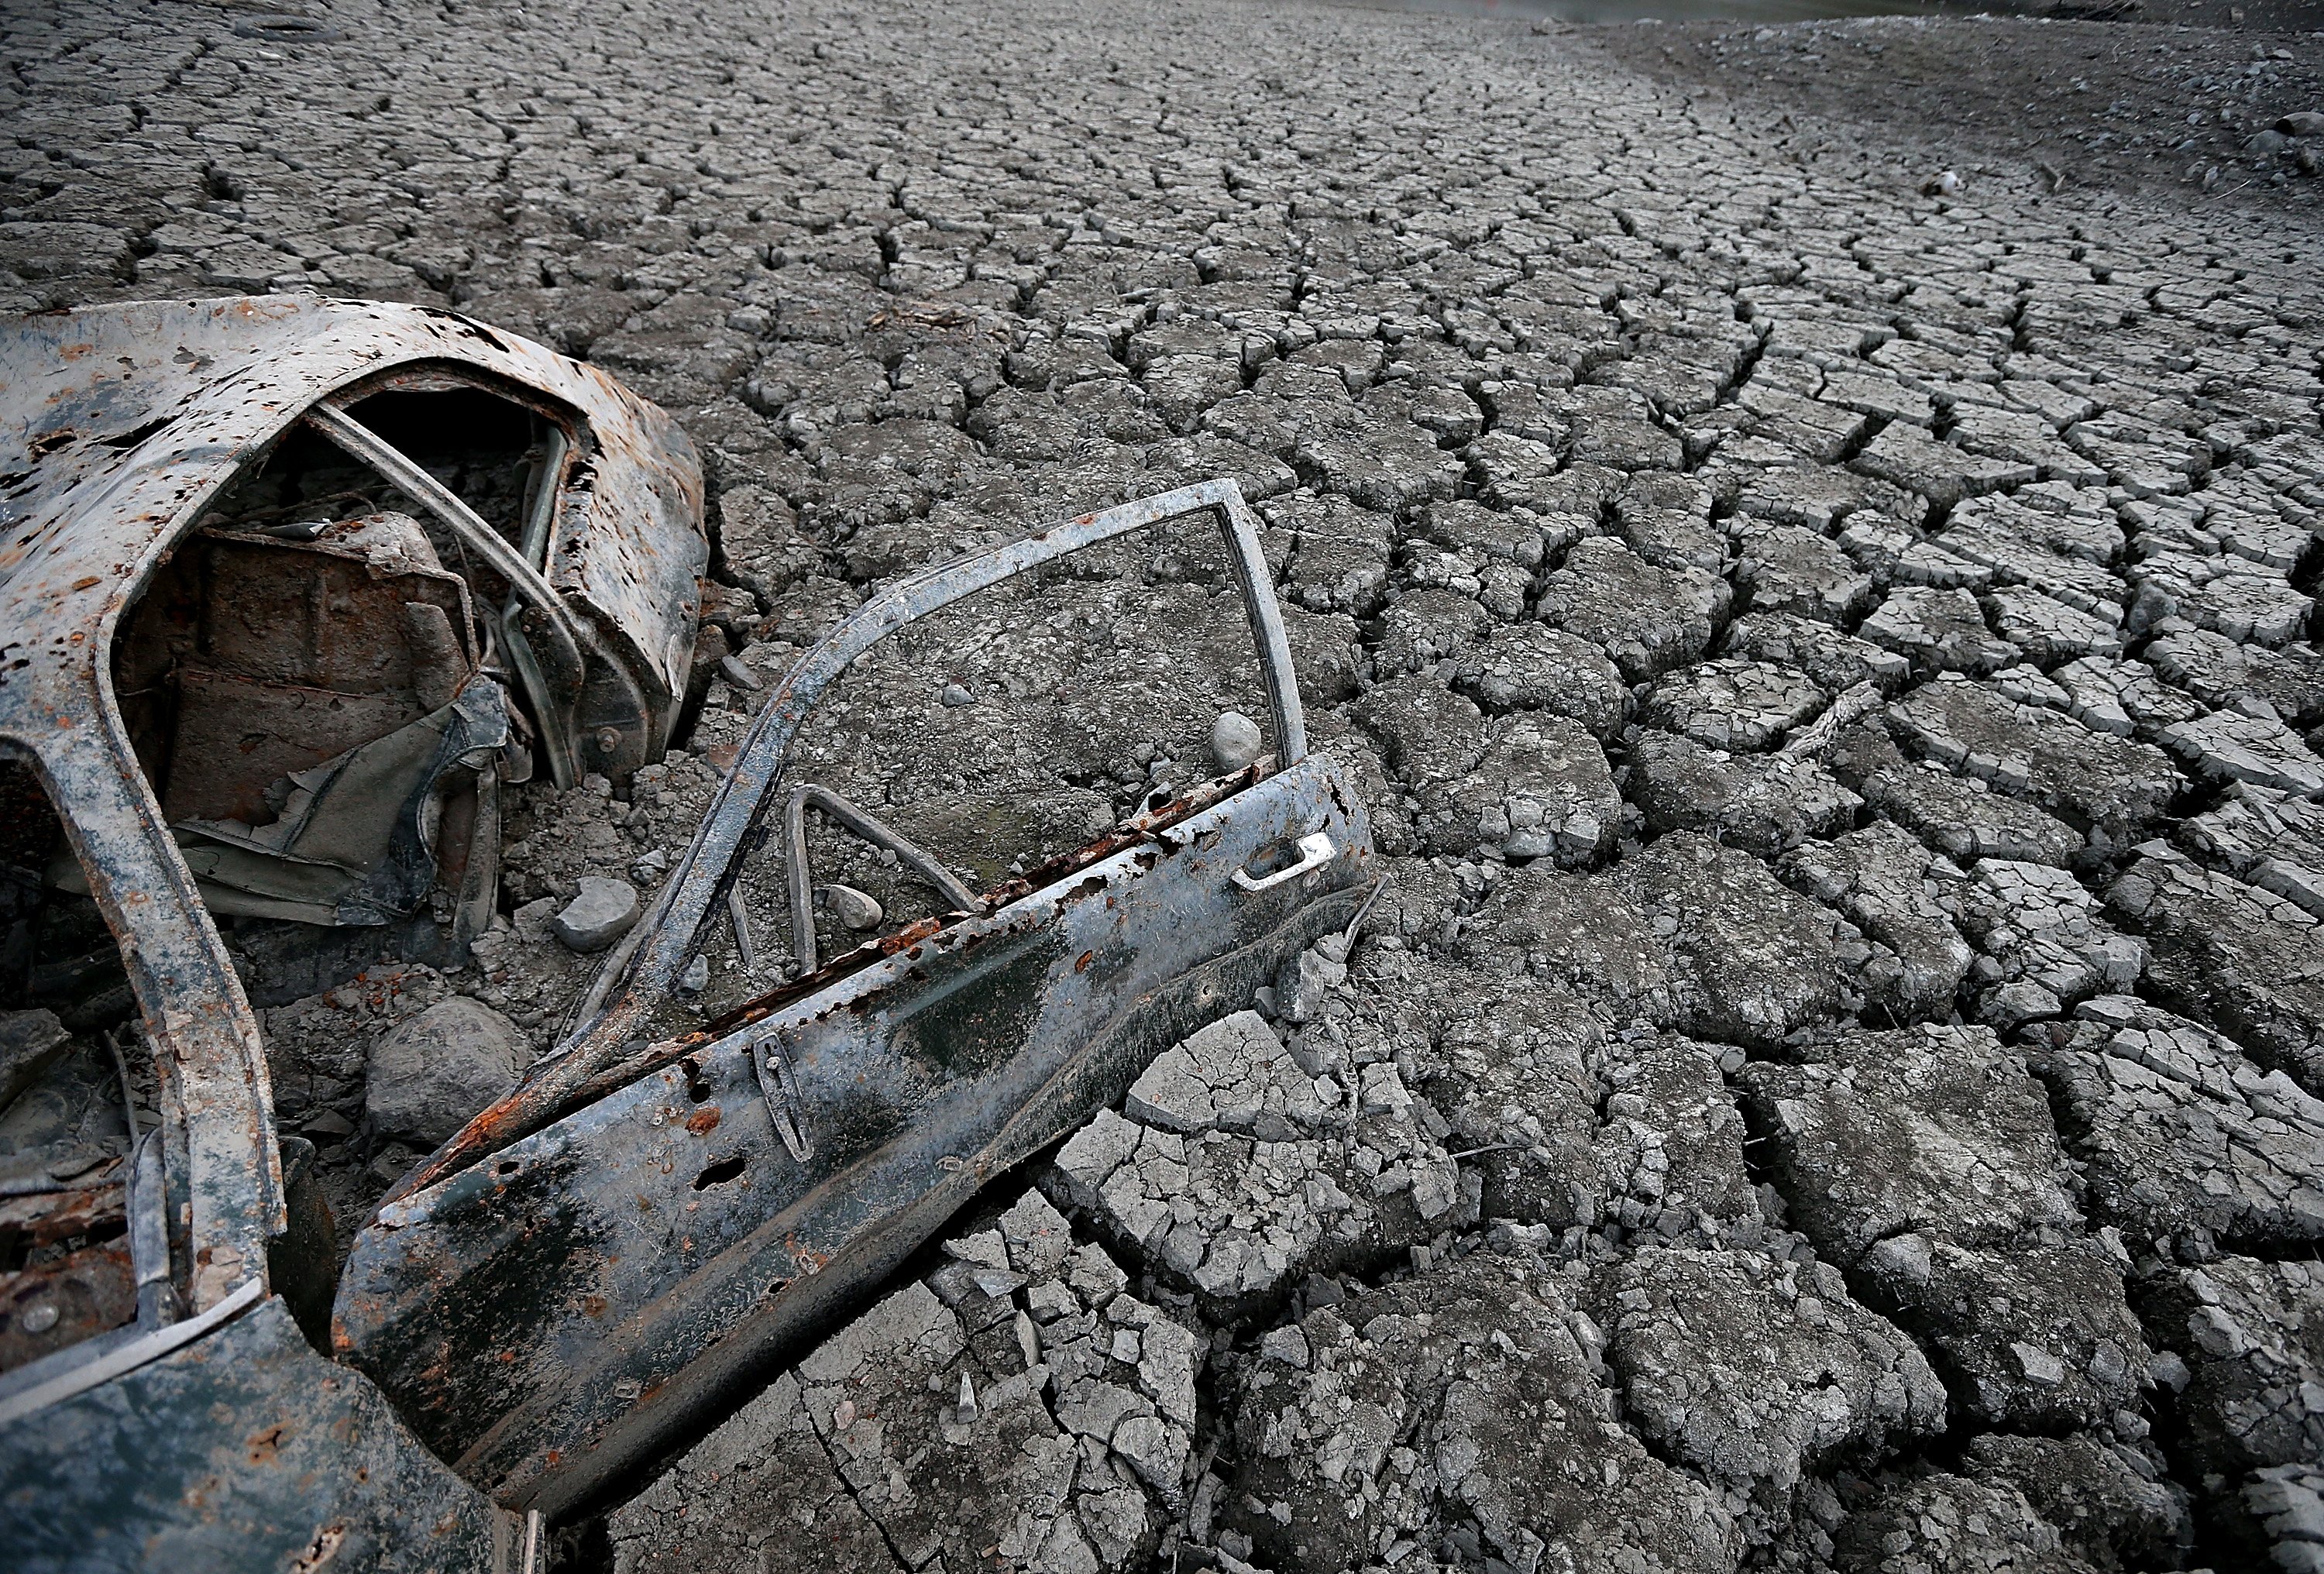 A car sits in dried and cracked earth of what was the bottom of the Almaden Reservoir on Jan. 28, 2014 in San Jose, California.